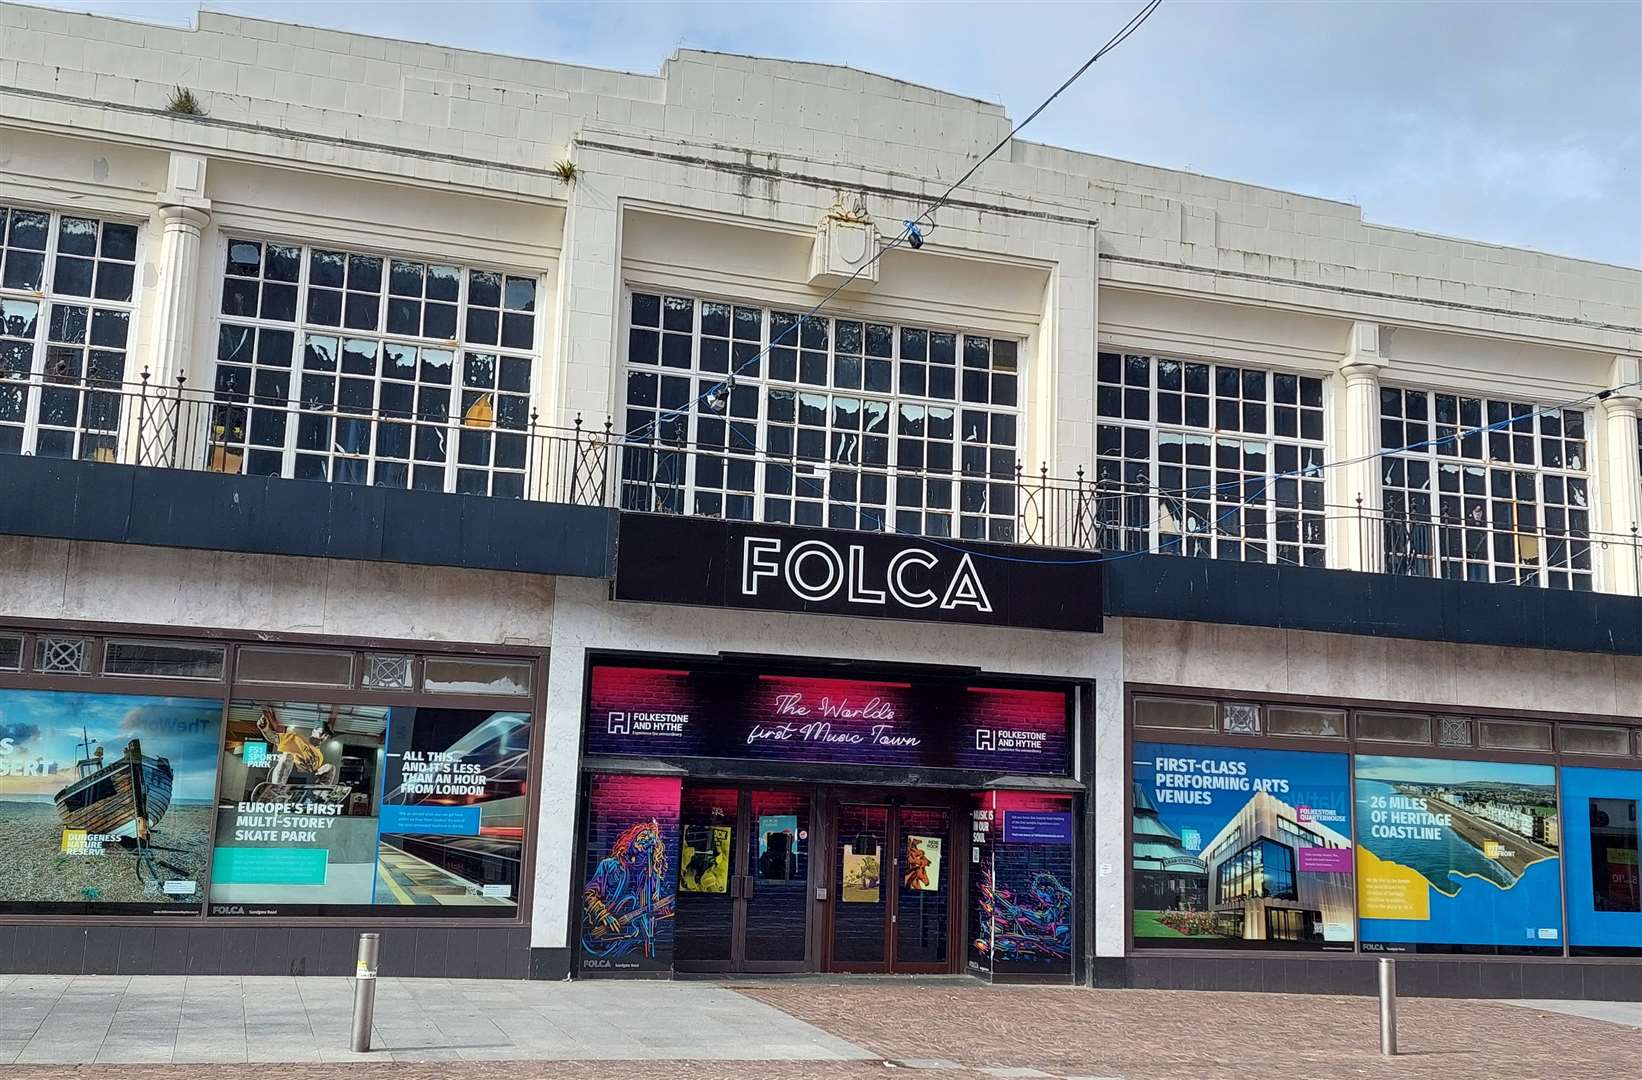 The former Debenhams building – now known as Folca – in Folkestone town centre